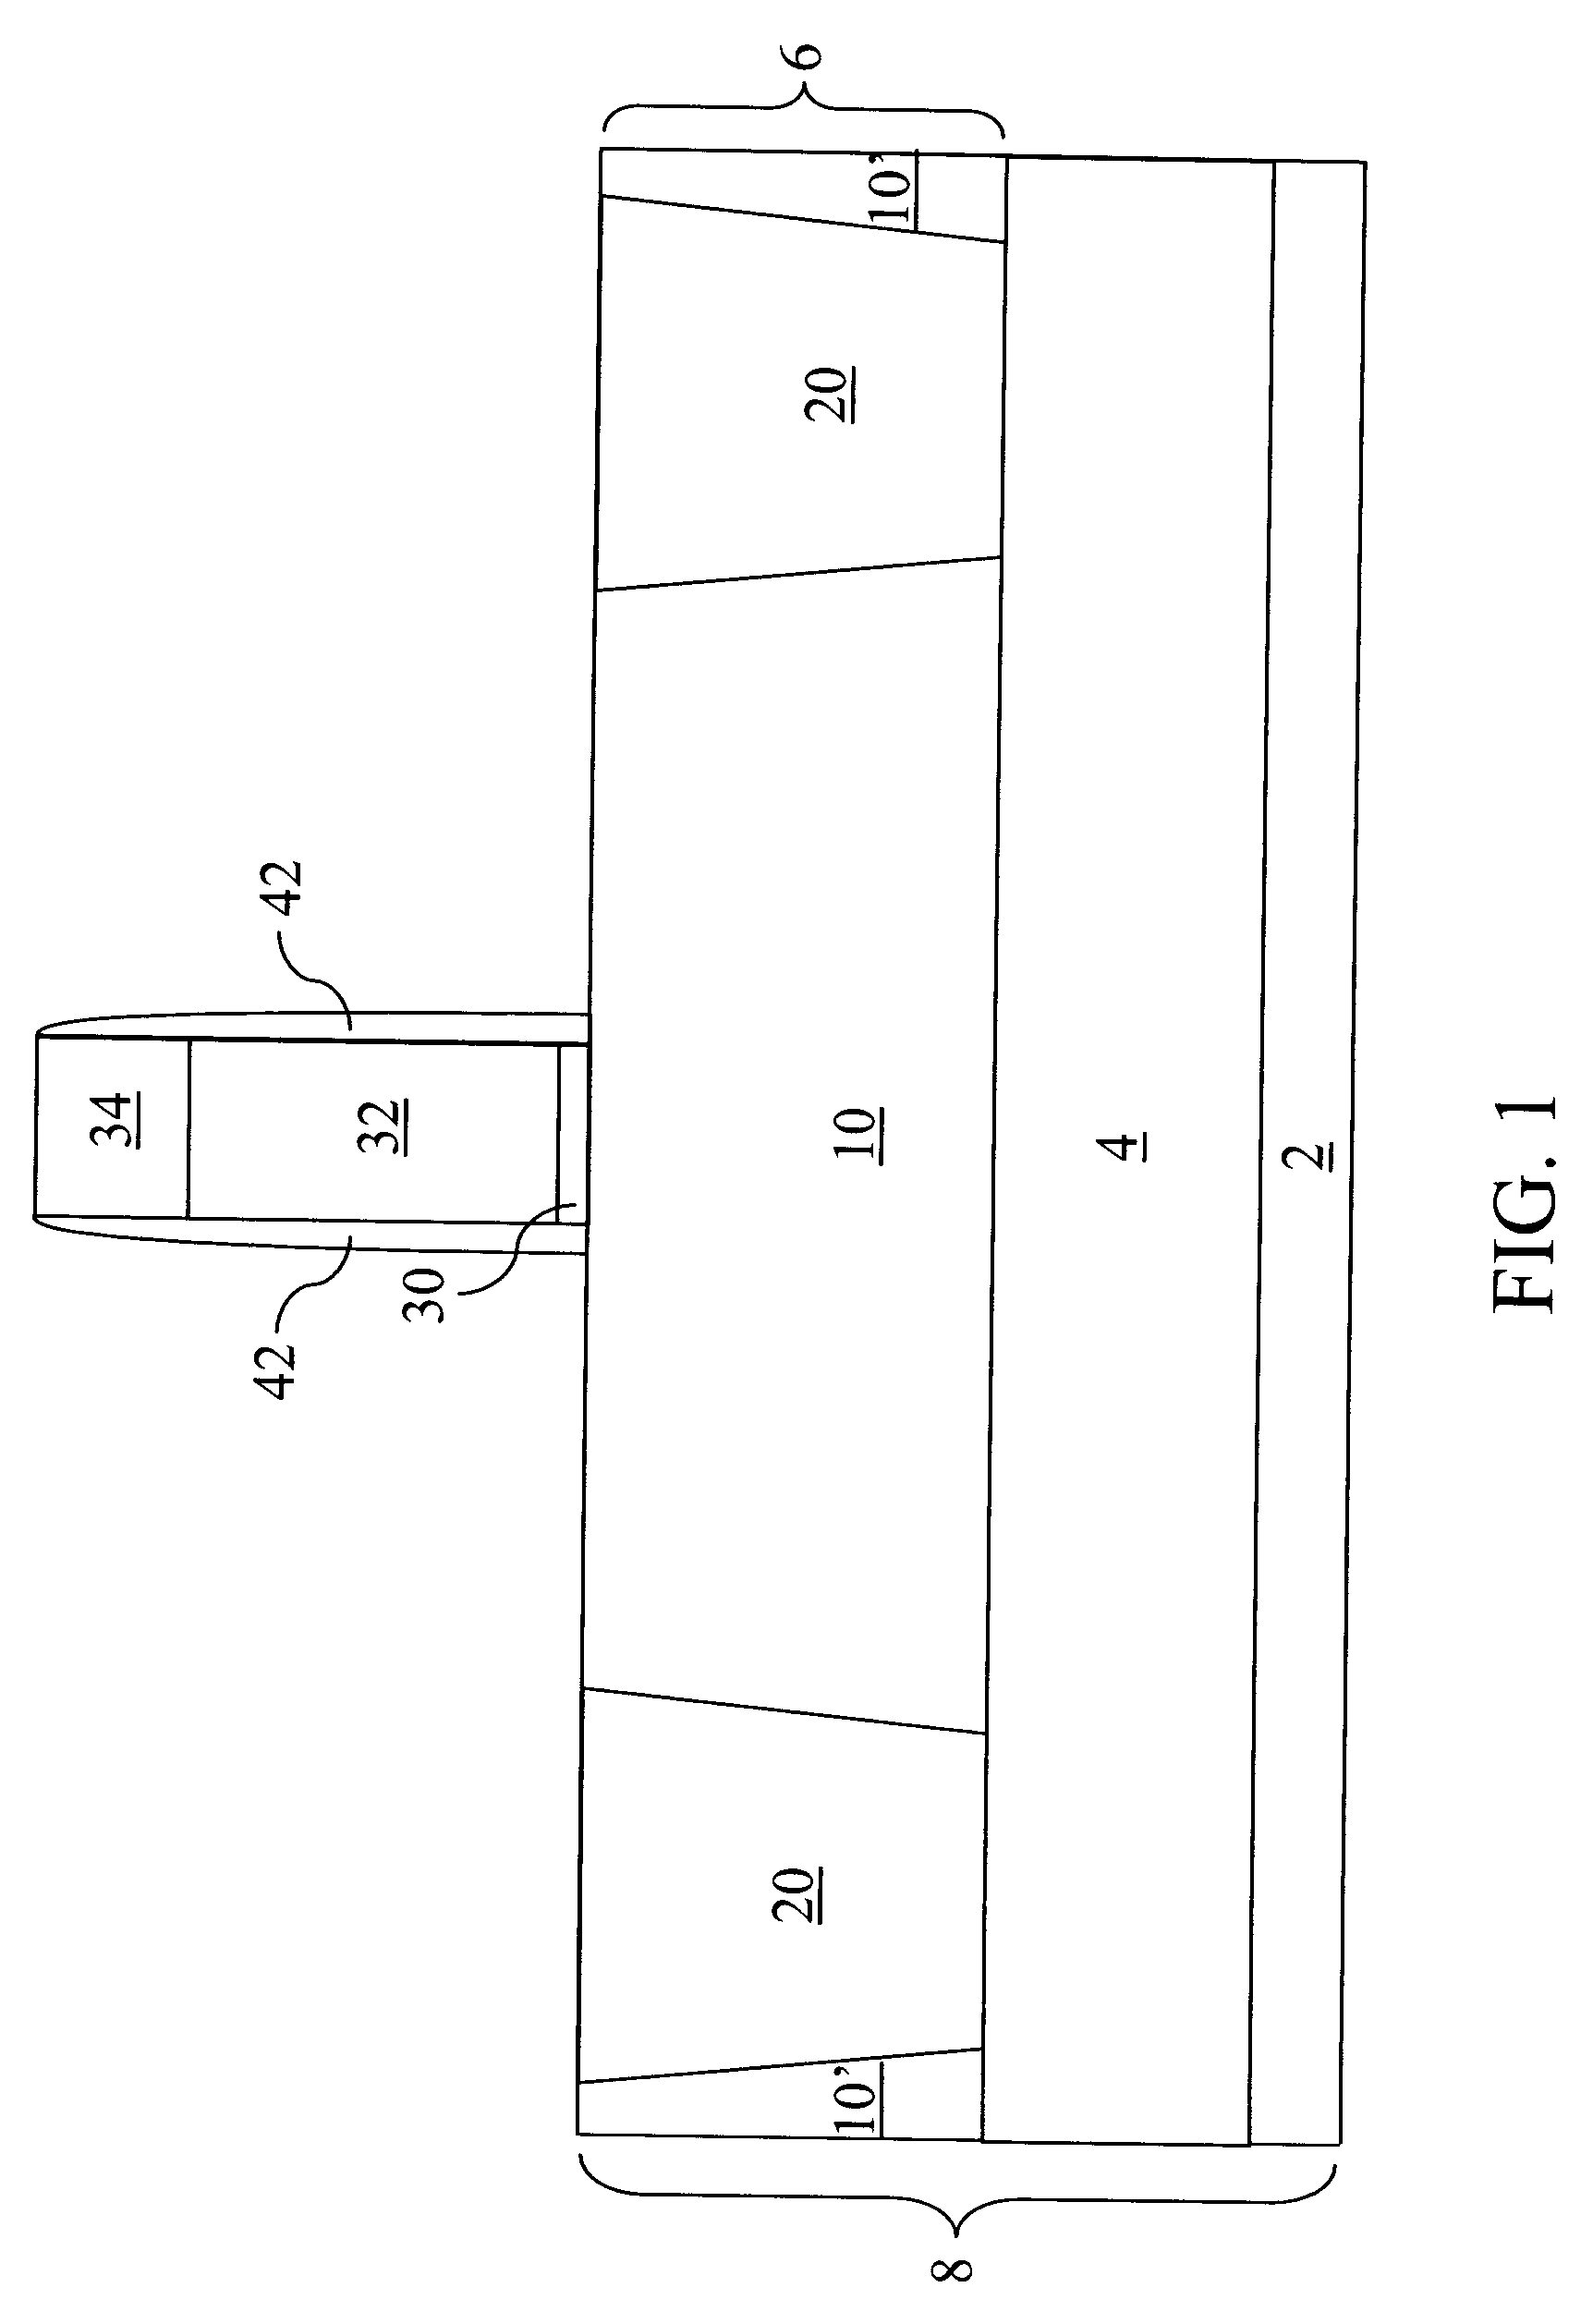 Field effect transistor containing a wide band gap semiconductor material in a drain